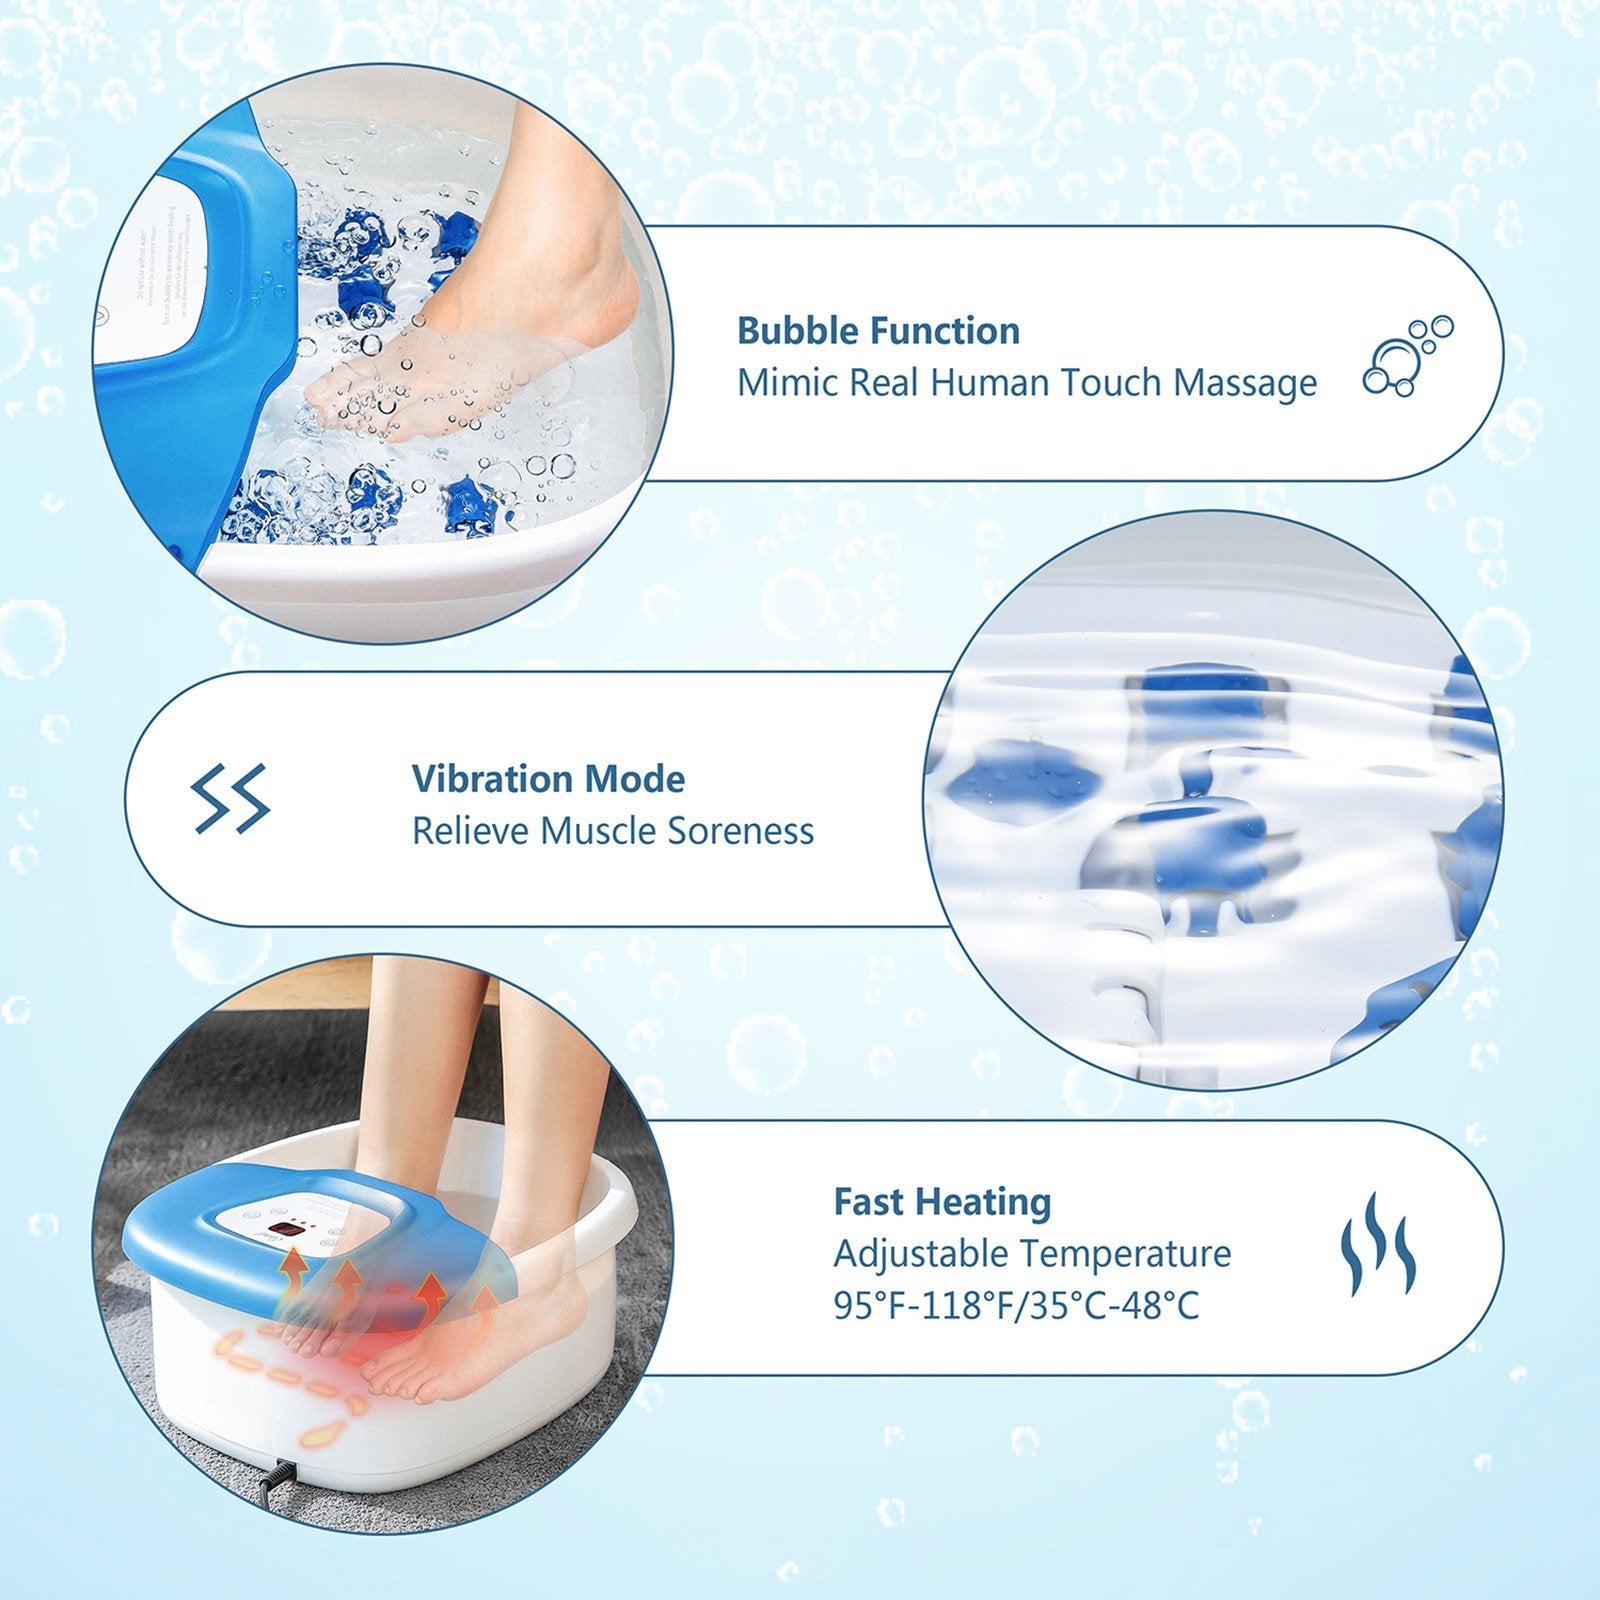 Load image into Gallery viewer, Foot Spa Bath Massager with Heat Bubbles Vibration, Heated Foot Bath Tub with Pedicure Grinding Stone, 16 Massage Rollers, Digital Temperature Control, Home Use - NAIPO
